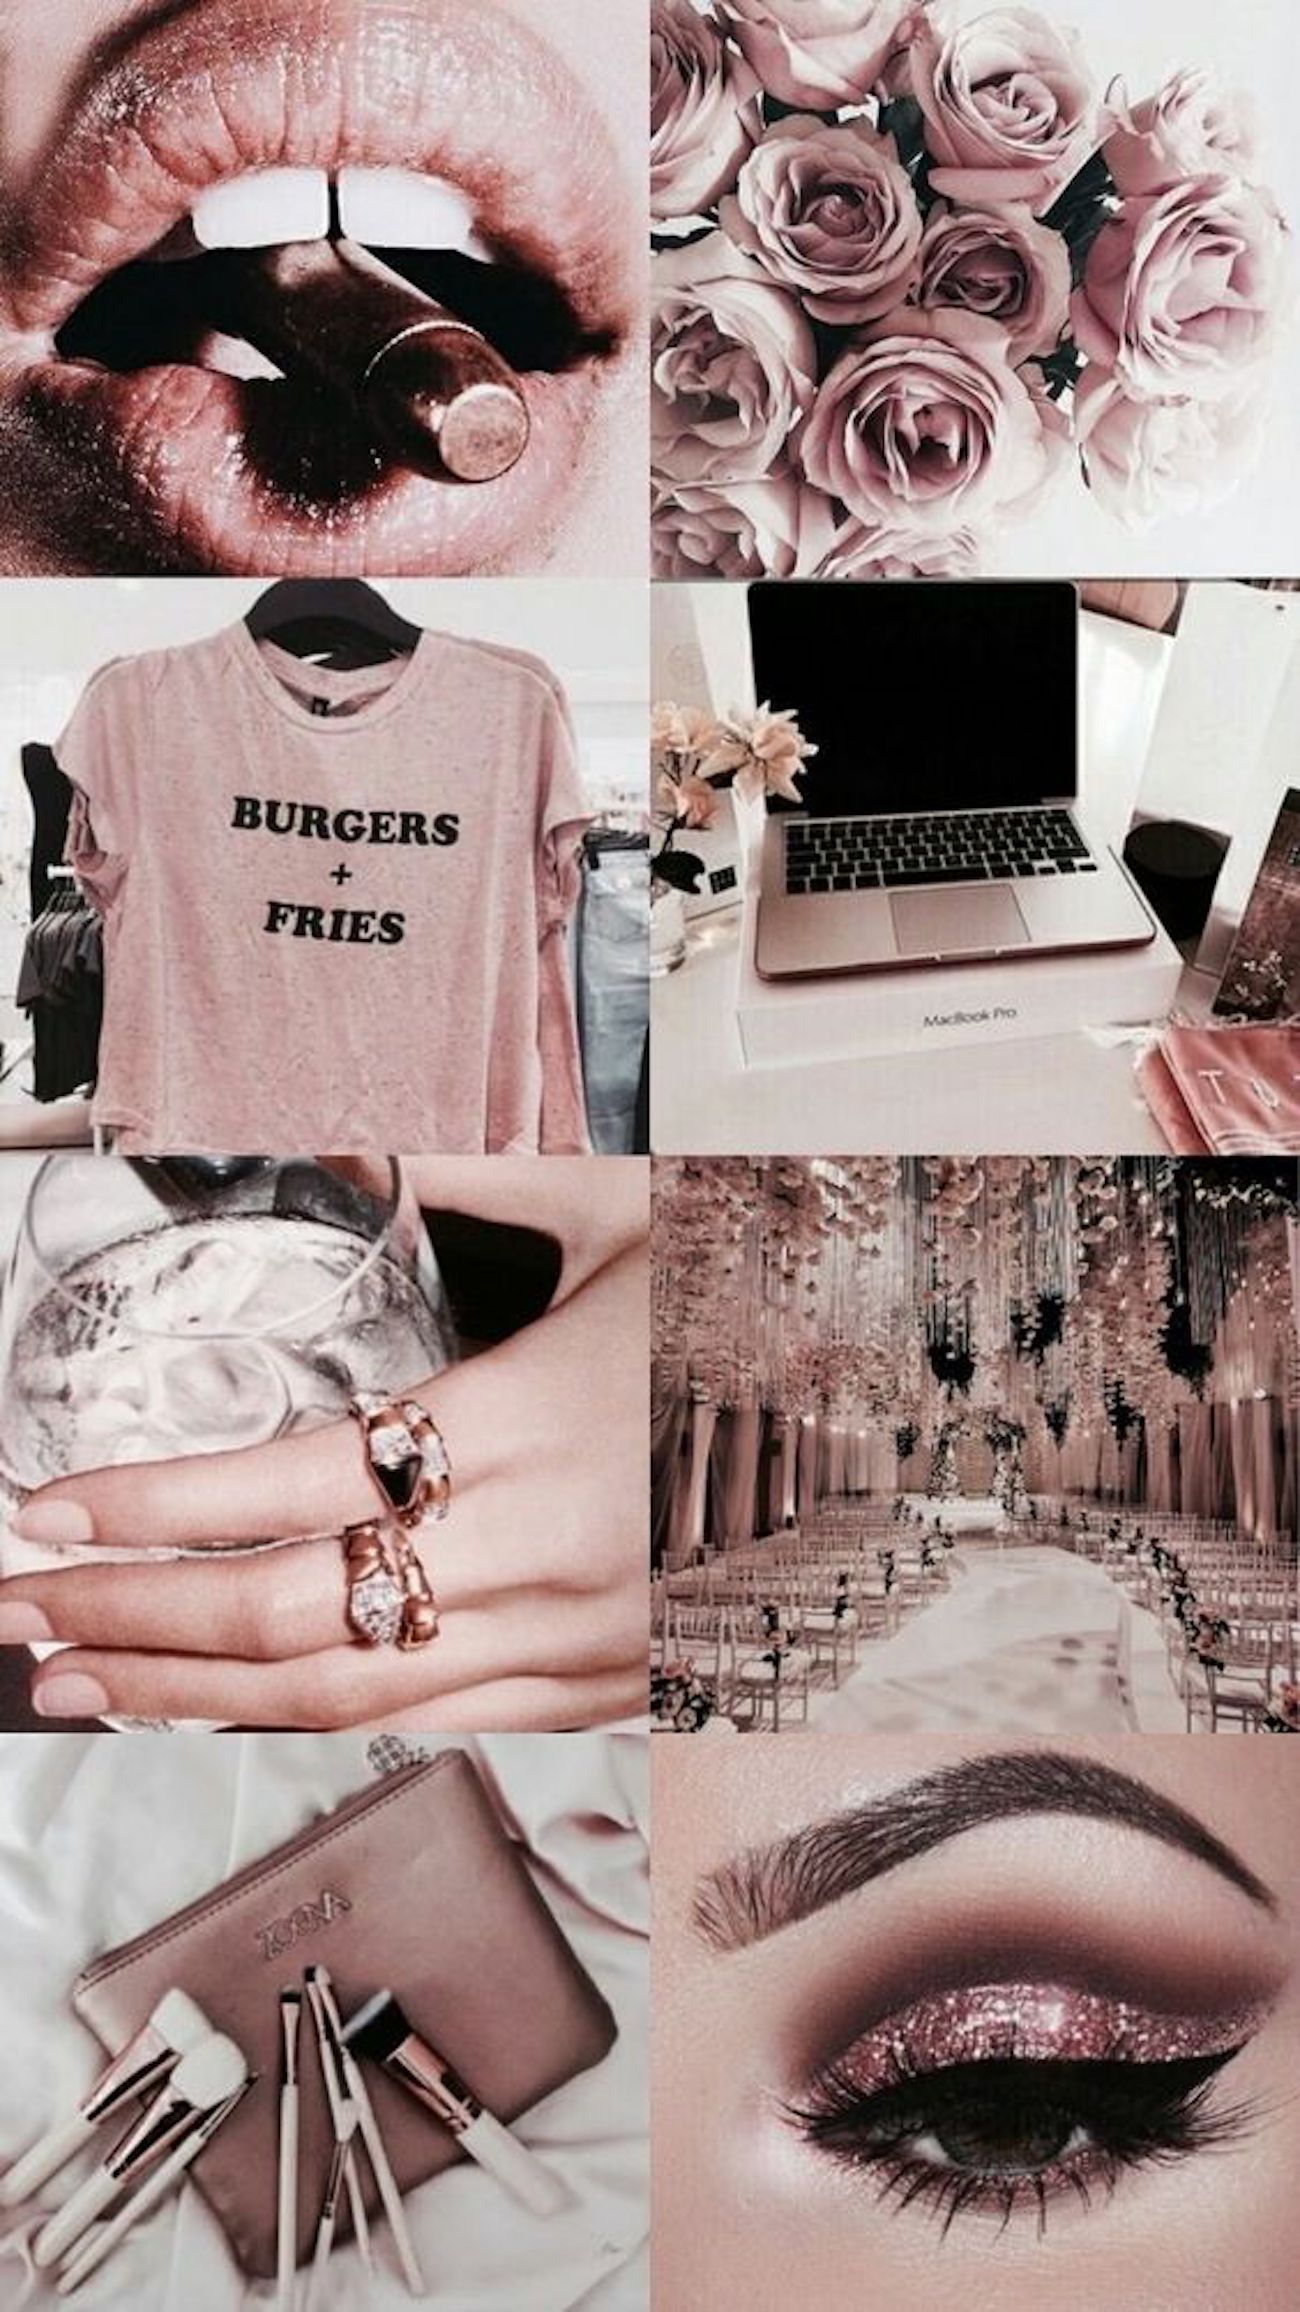 Aesthetic collage of a pink shirt, roses, a laptop, makeup, and a room. - Rose gold, gold, fashion